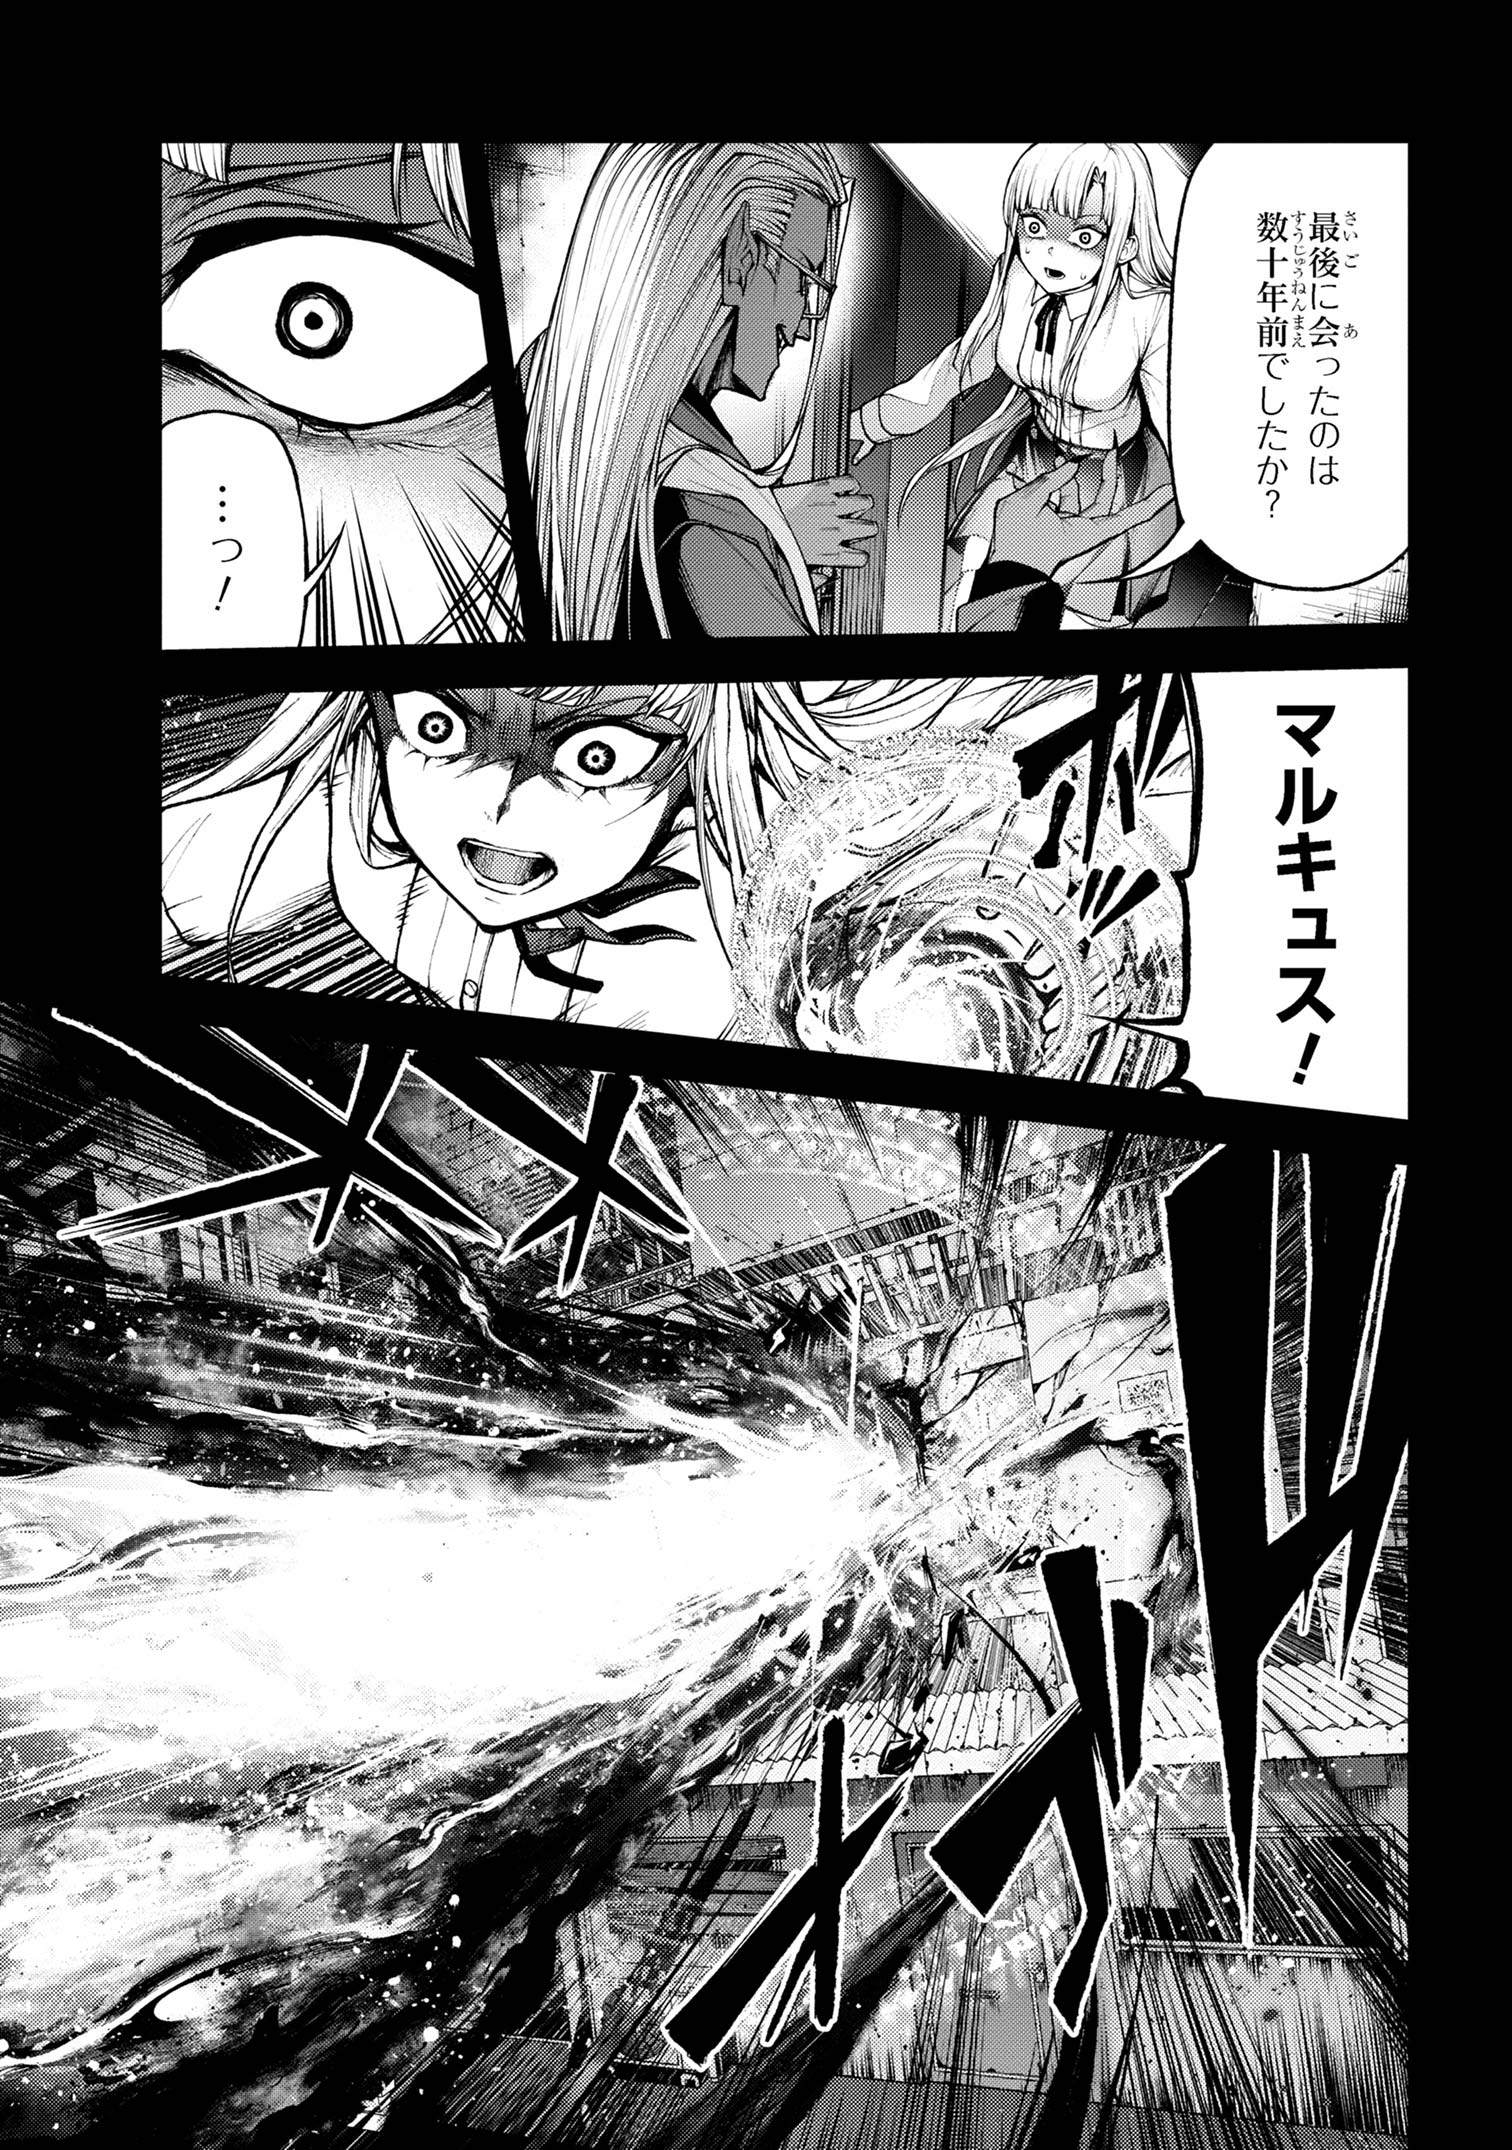 Maou 2099 - Chapter 8.1 - Page 7